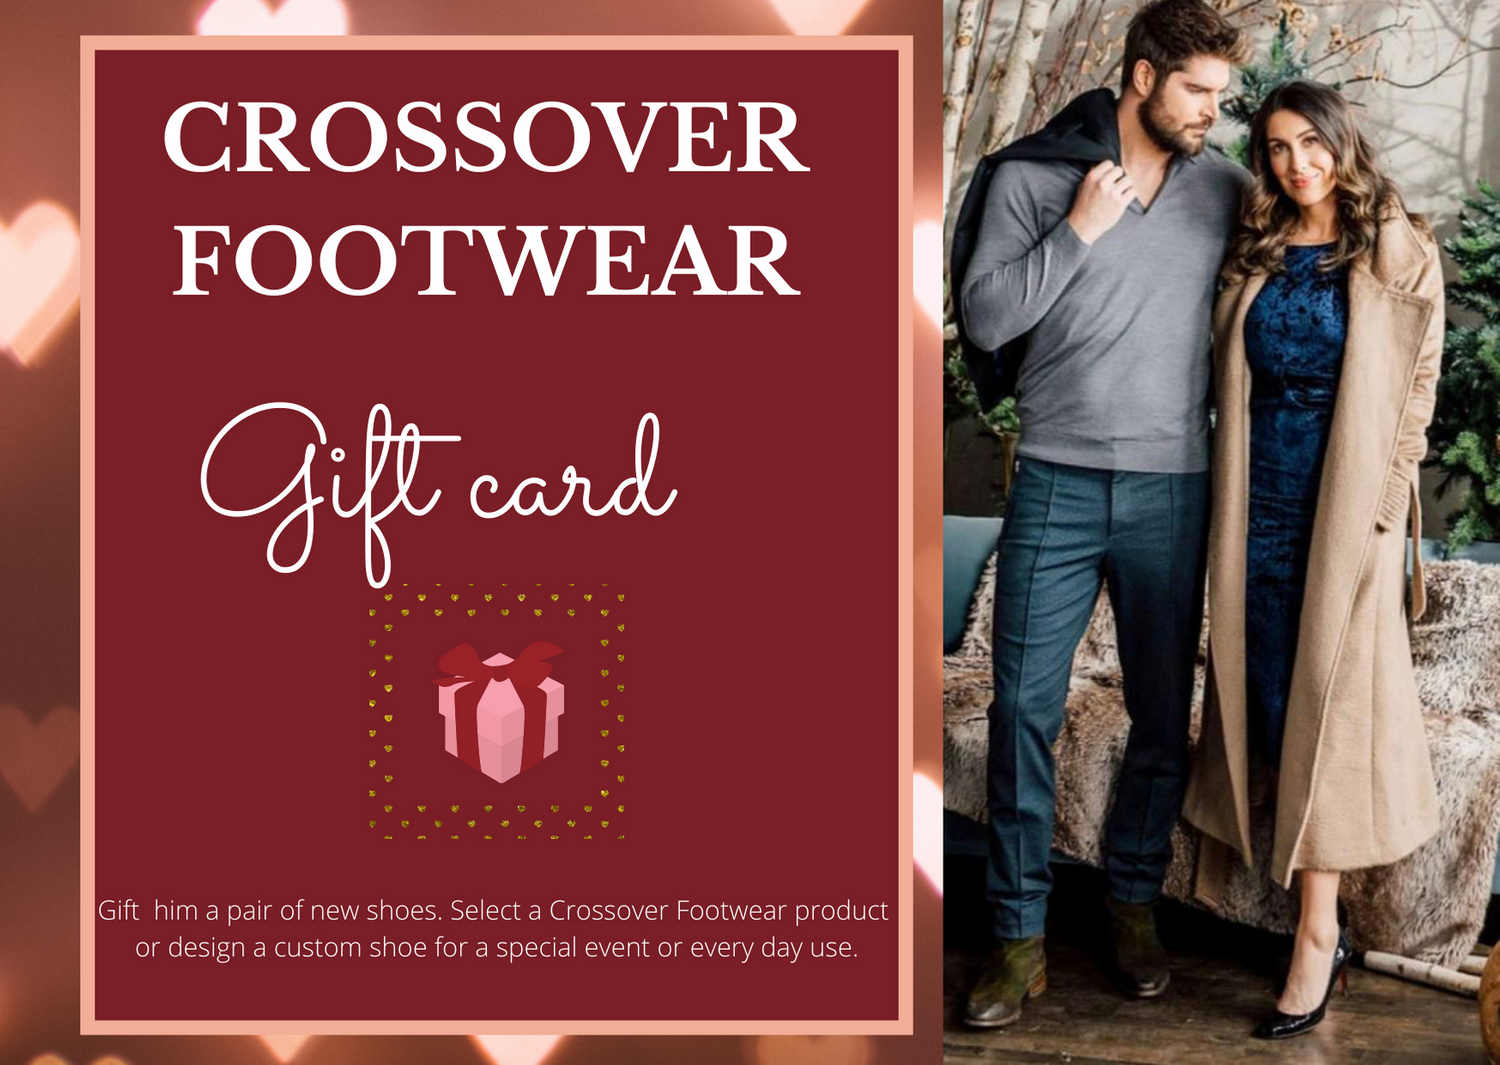 Crossover Footwear Gift Card shoes for men and women